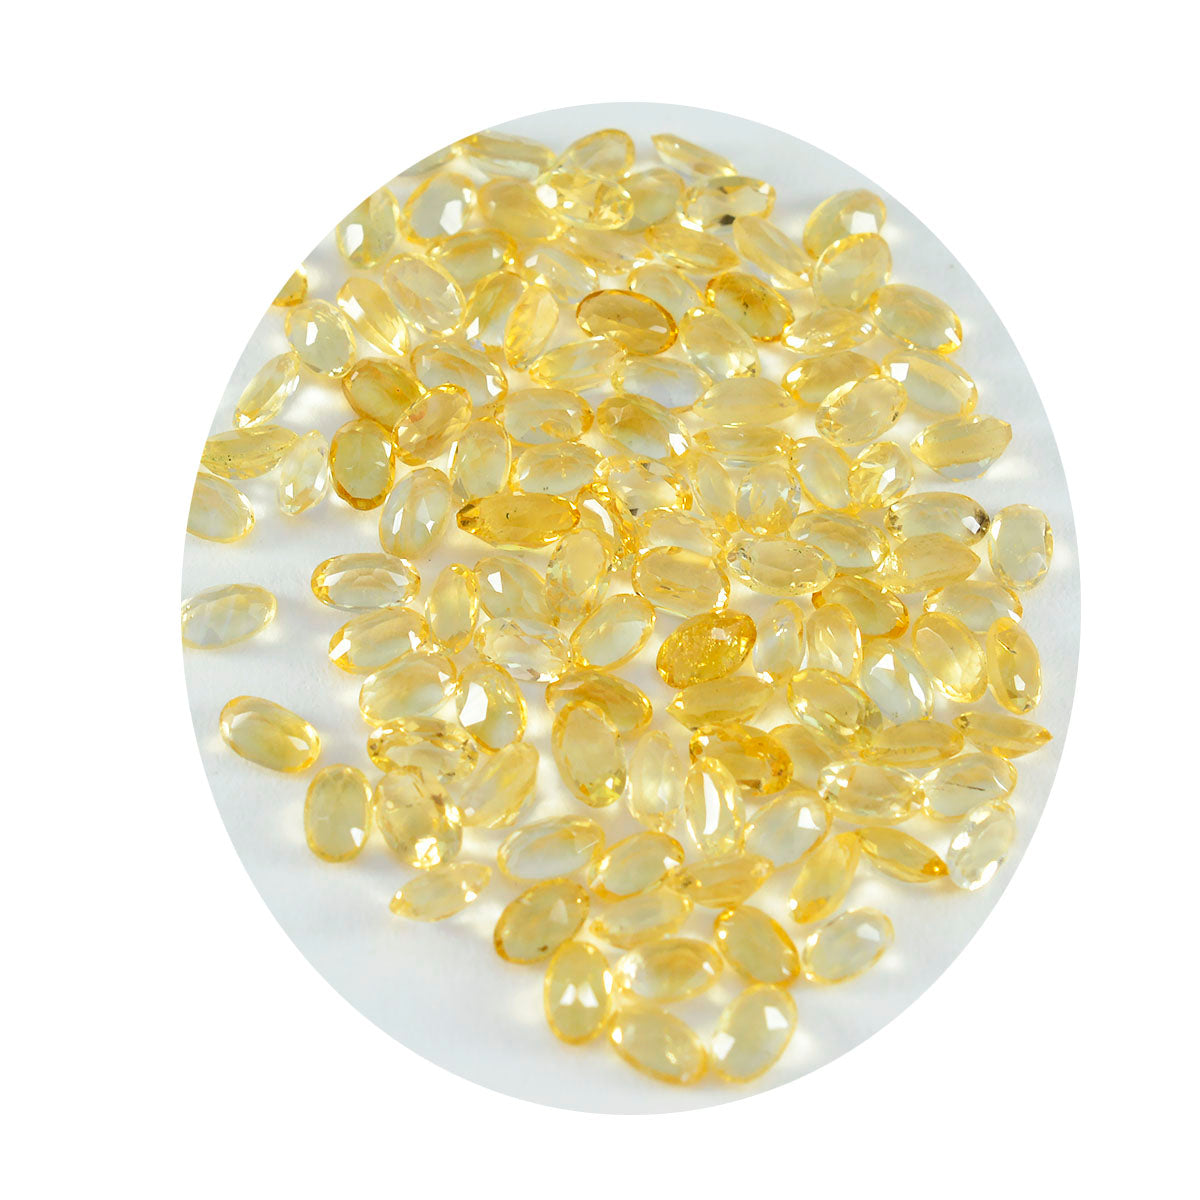 Riyogems 1PC Real Yellow Citrine Faceted 3x5 mm Oval Shape Good Quality Gemstone